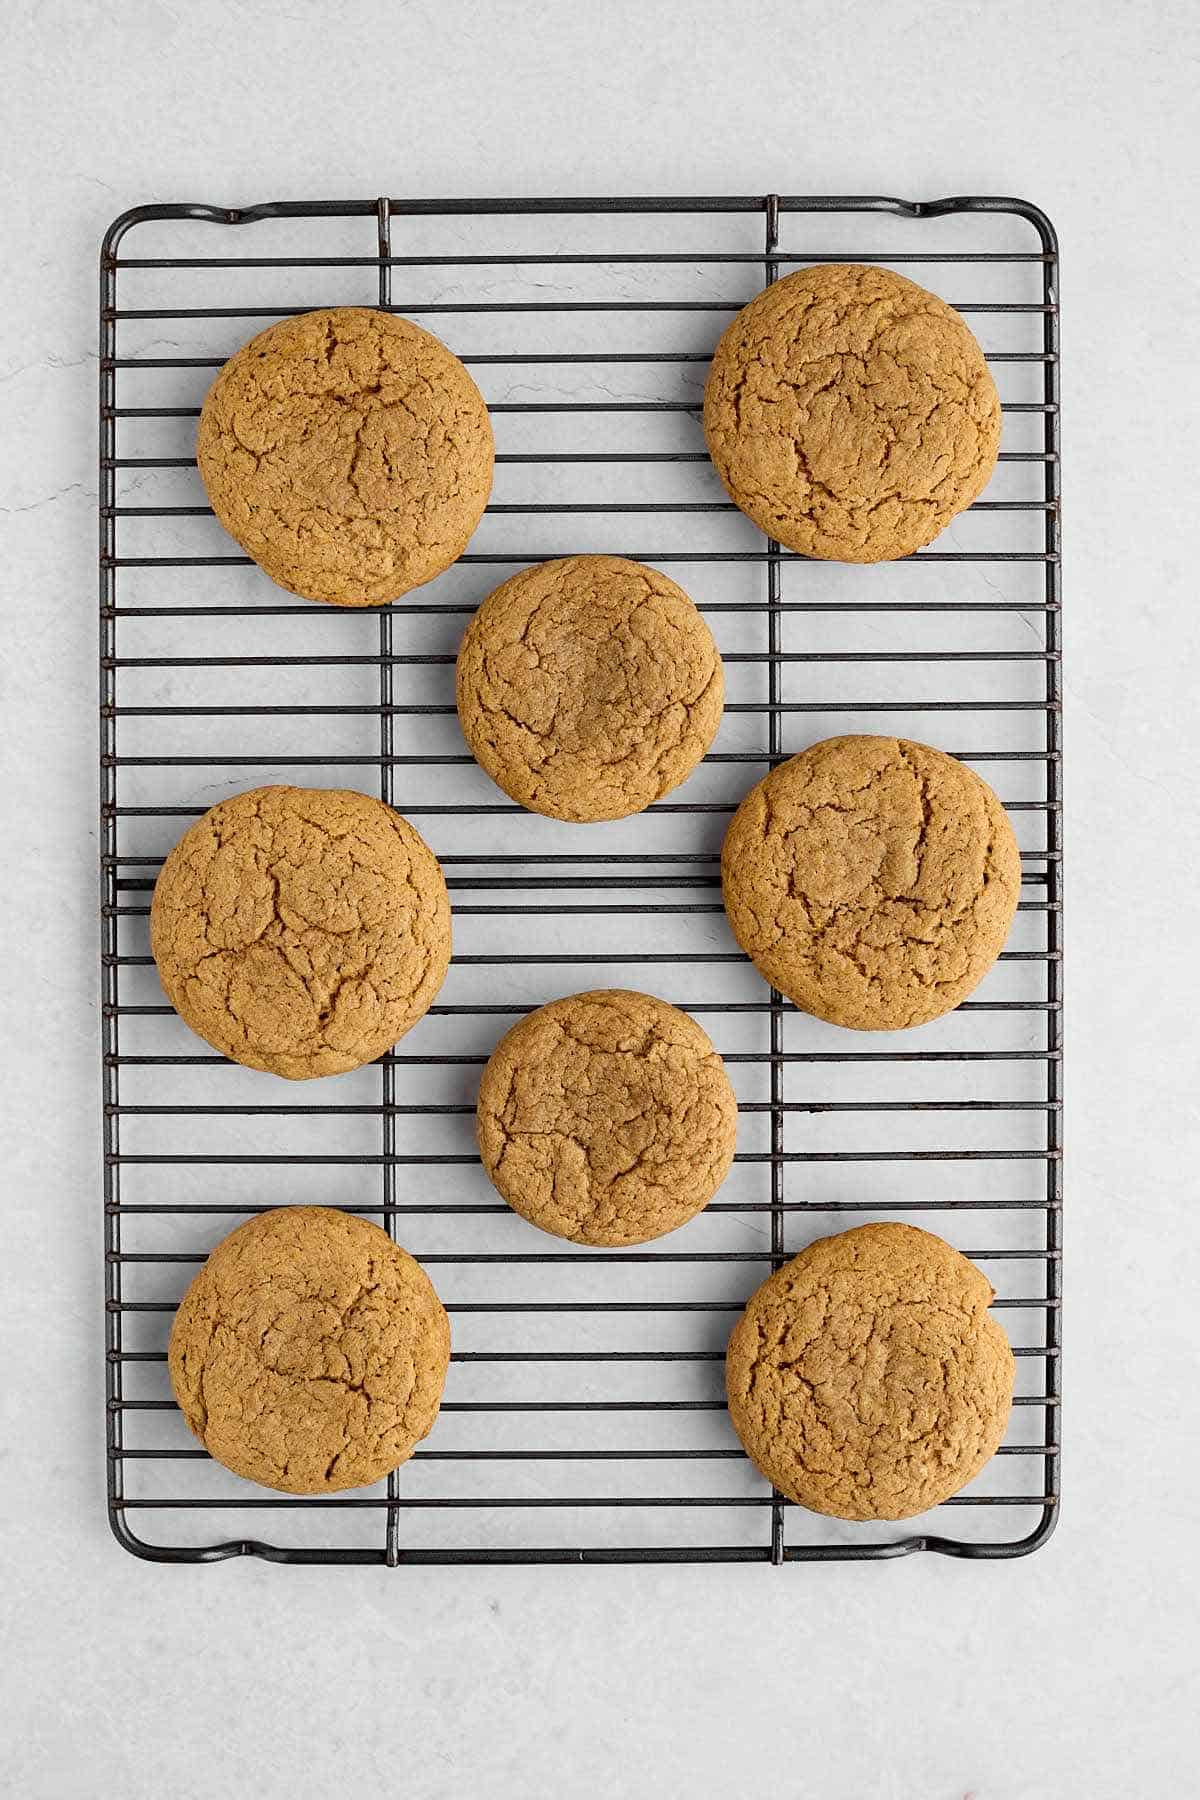 Spice cake mix cookies cooling on a wire rack.